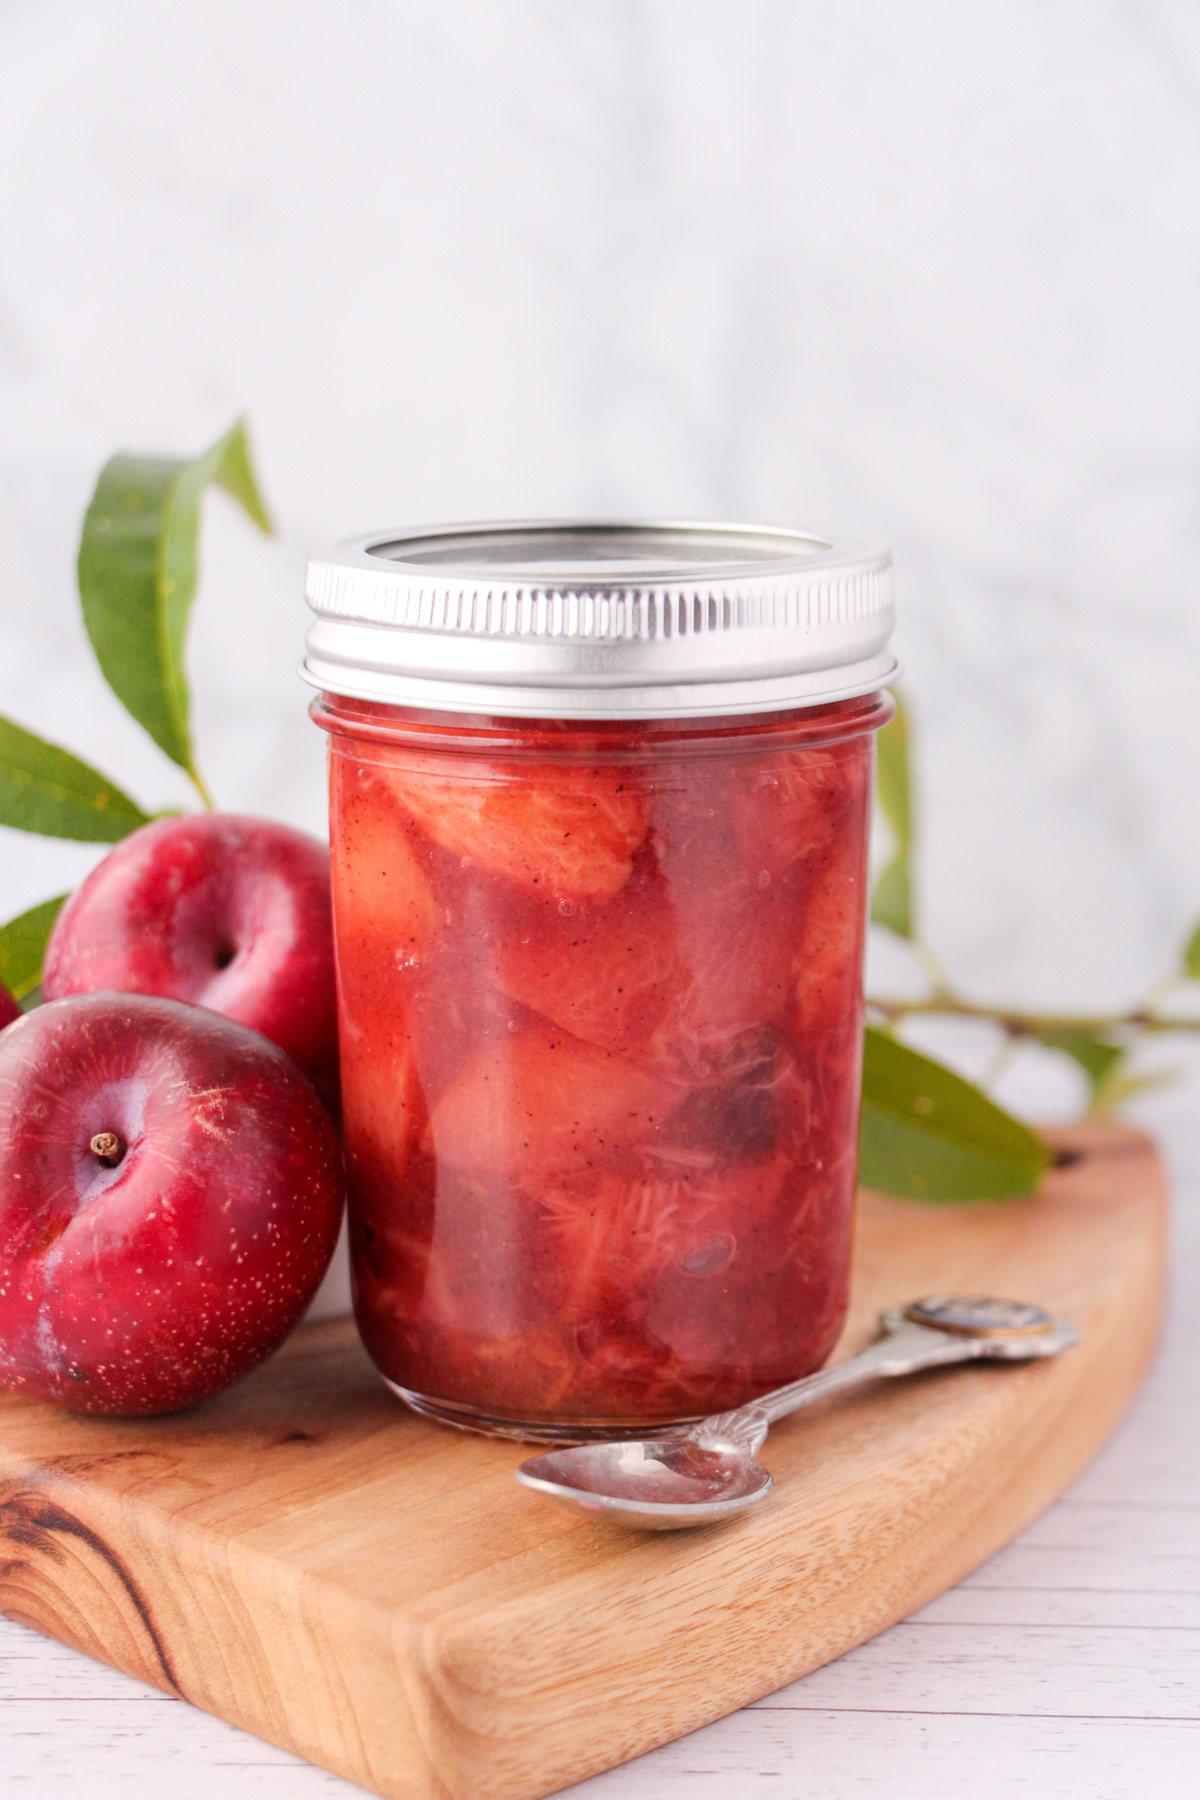 Plum compote in a mason jar with a vintage spoon, fresh plums and leaves on the side.